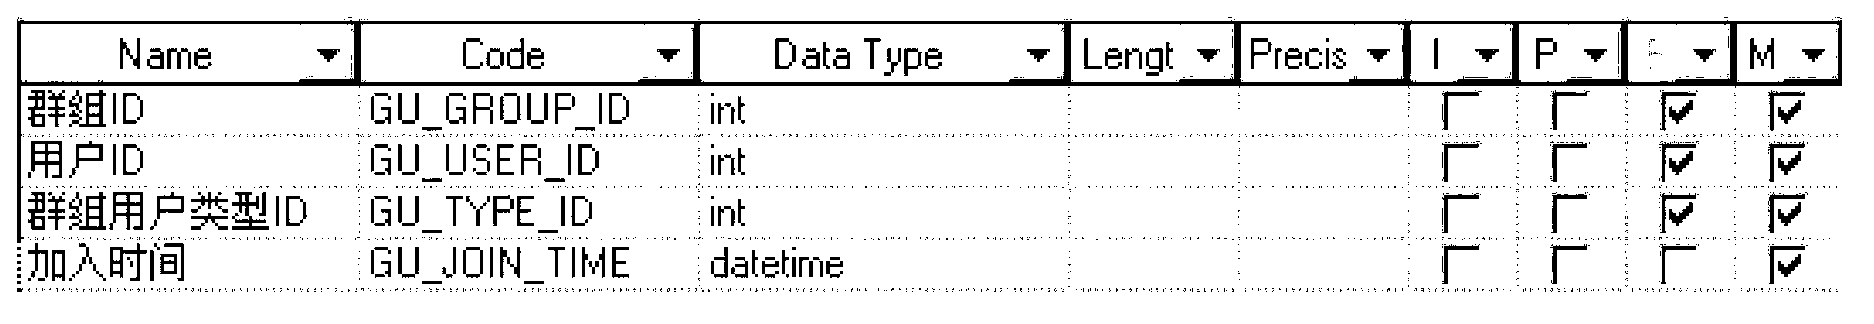 Incremental data capturing and extraction method based on timestamps and logs